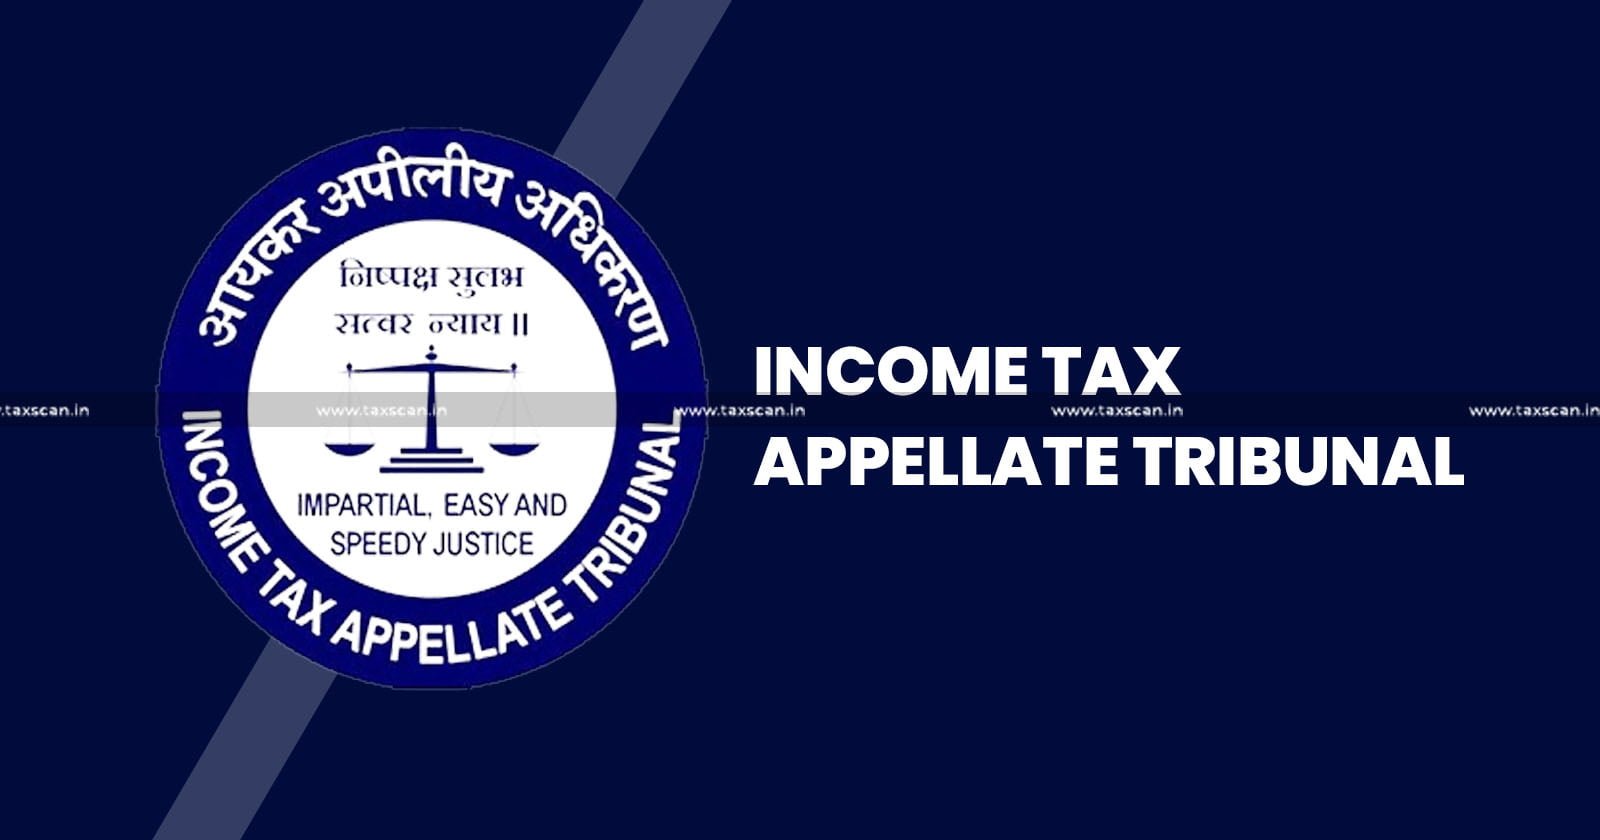 Failure to make Enquiries - Proprietary of Sale - Seized Documents - ITAT directs Re-Adjudication - ITAT - INCOME TAX - INCOME TAX ACT - TAXSCAN